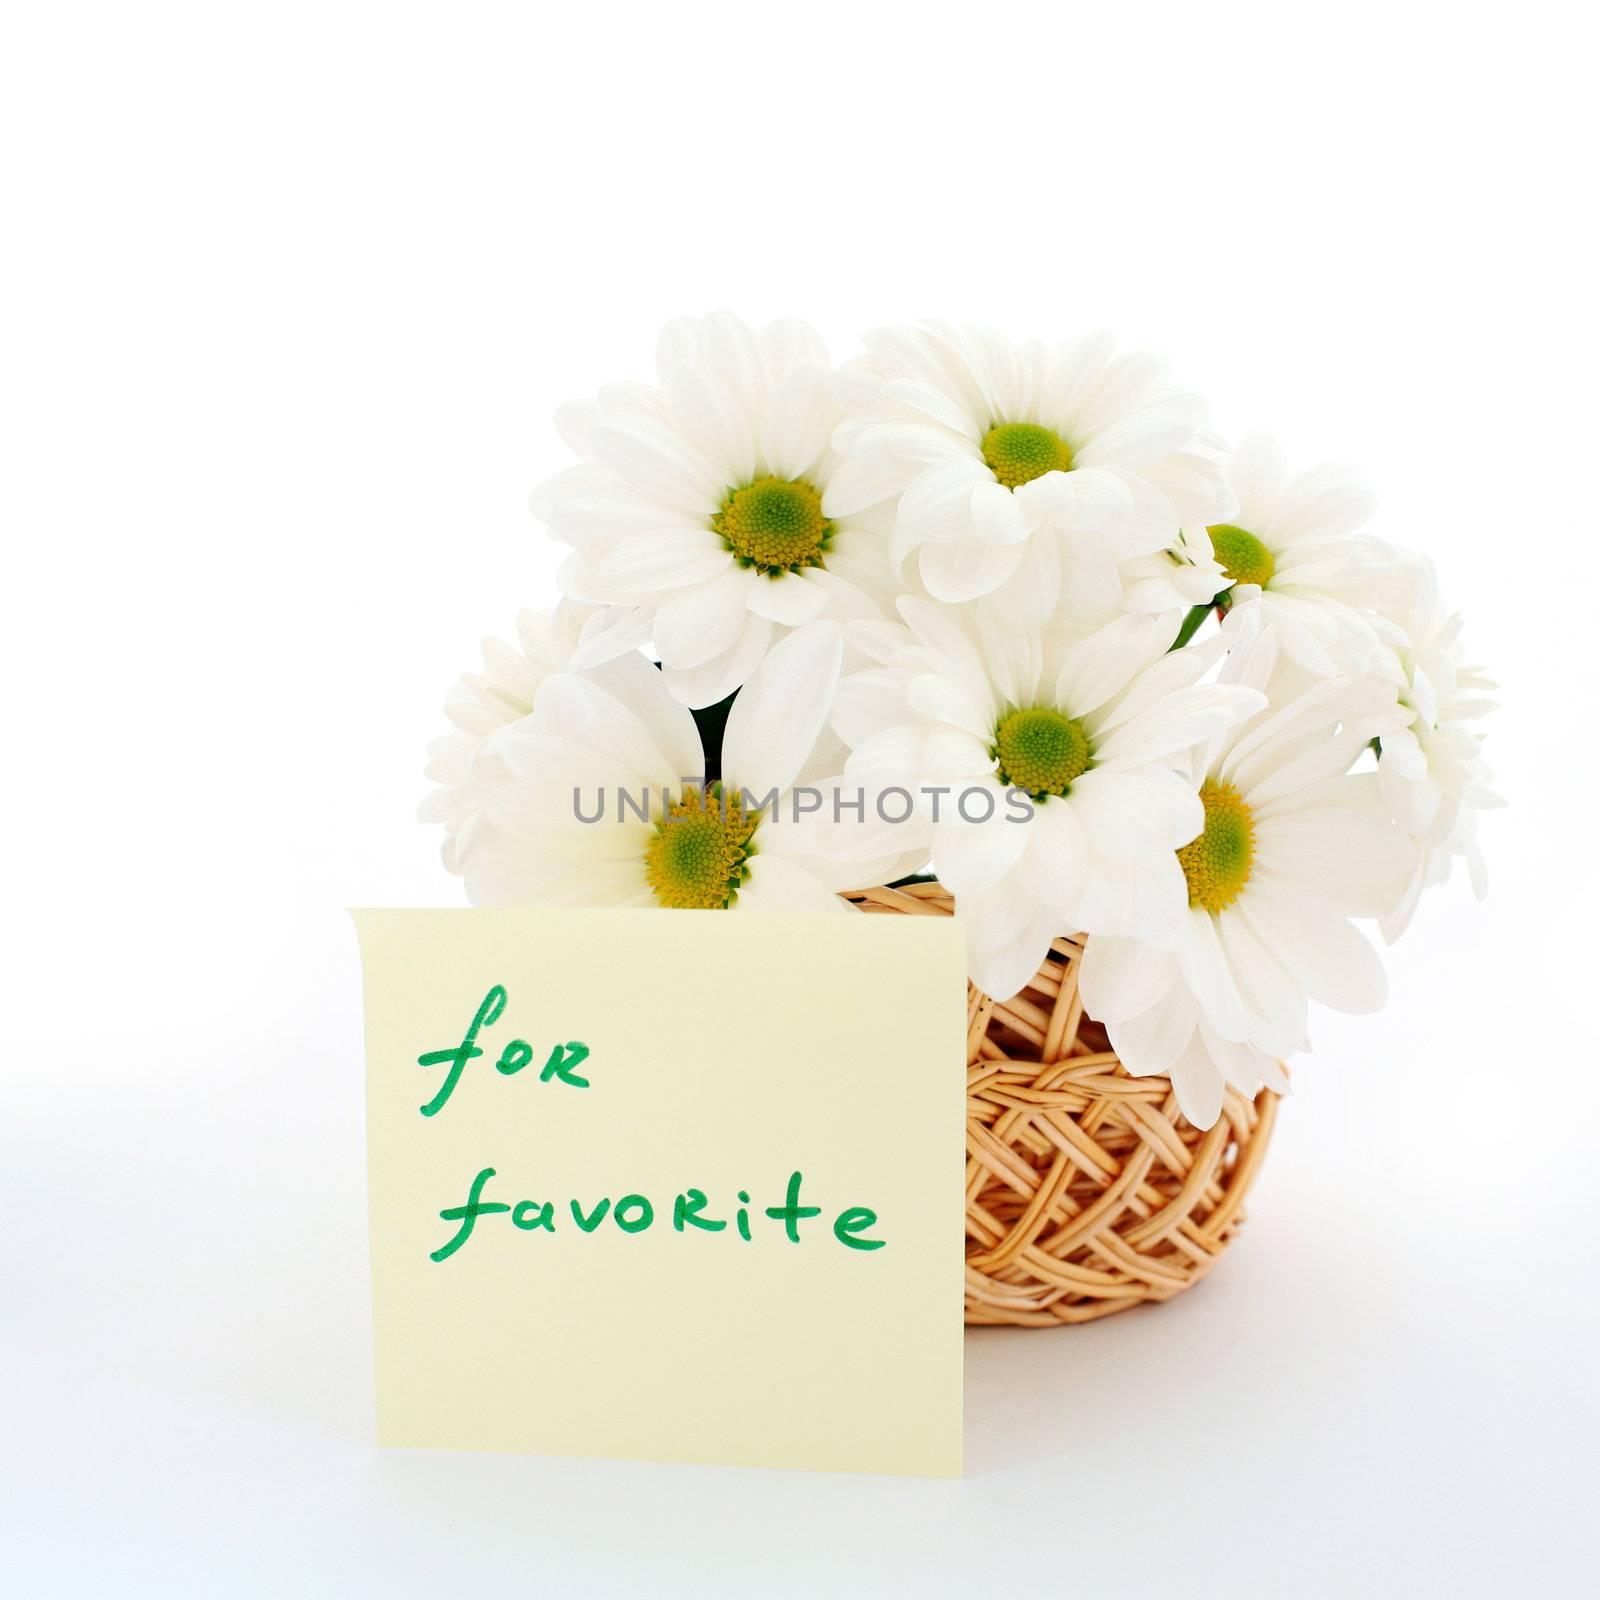 An image of basket with white daisies with inscription (for favorite)